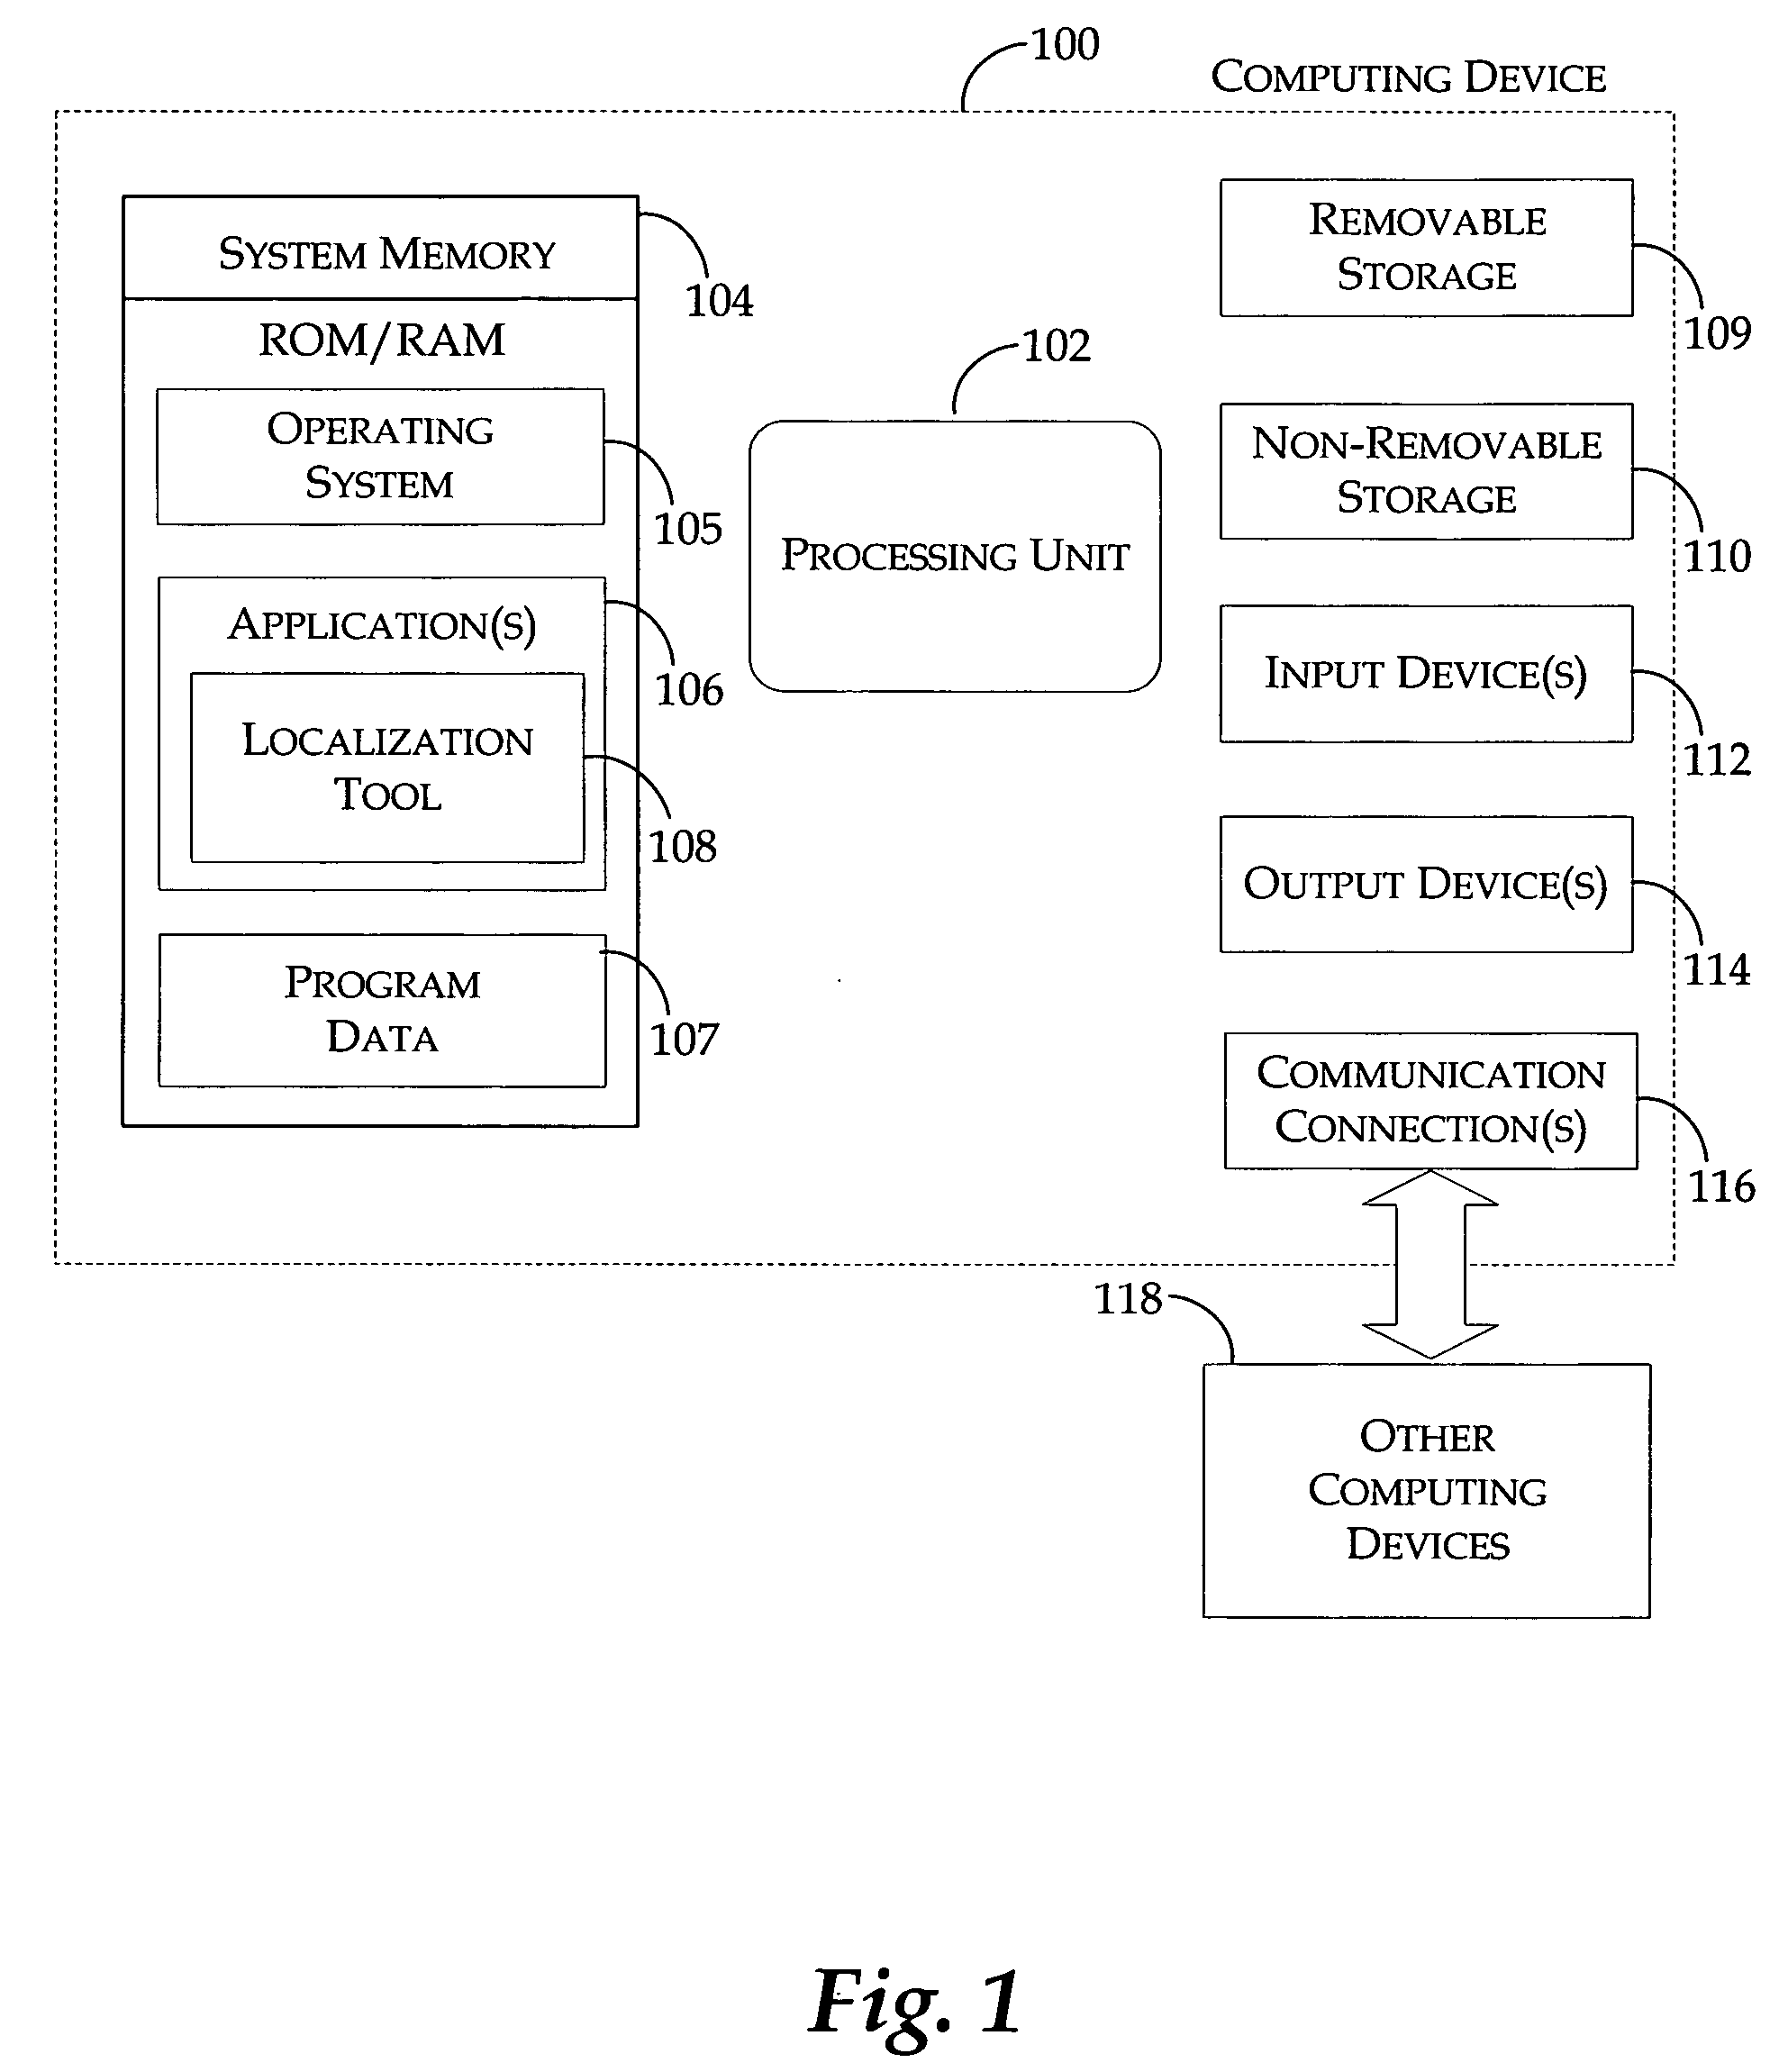 Method and system for localizing a package